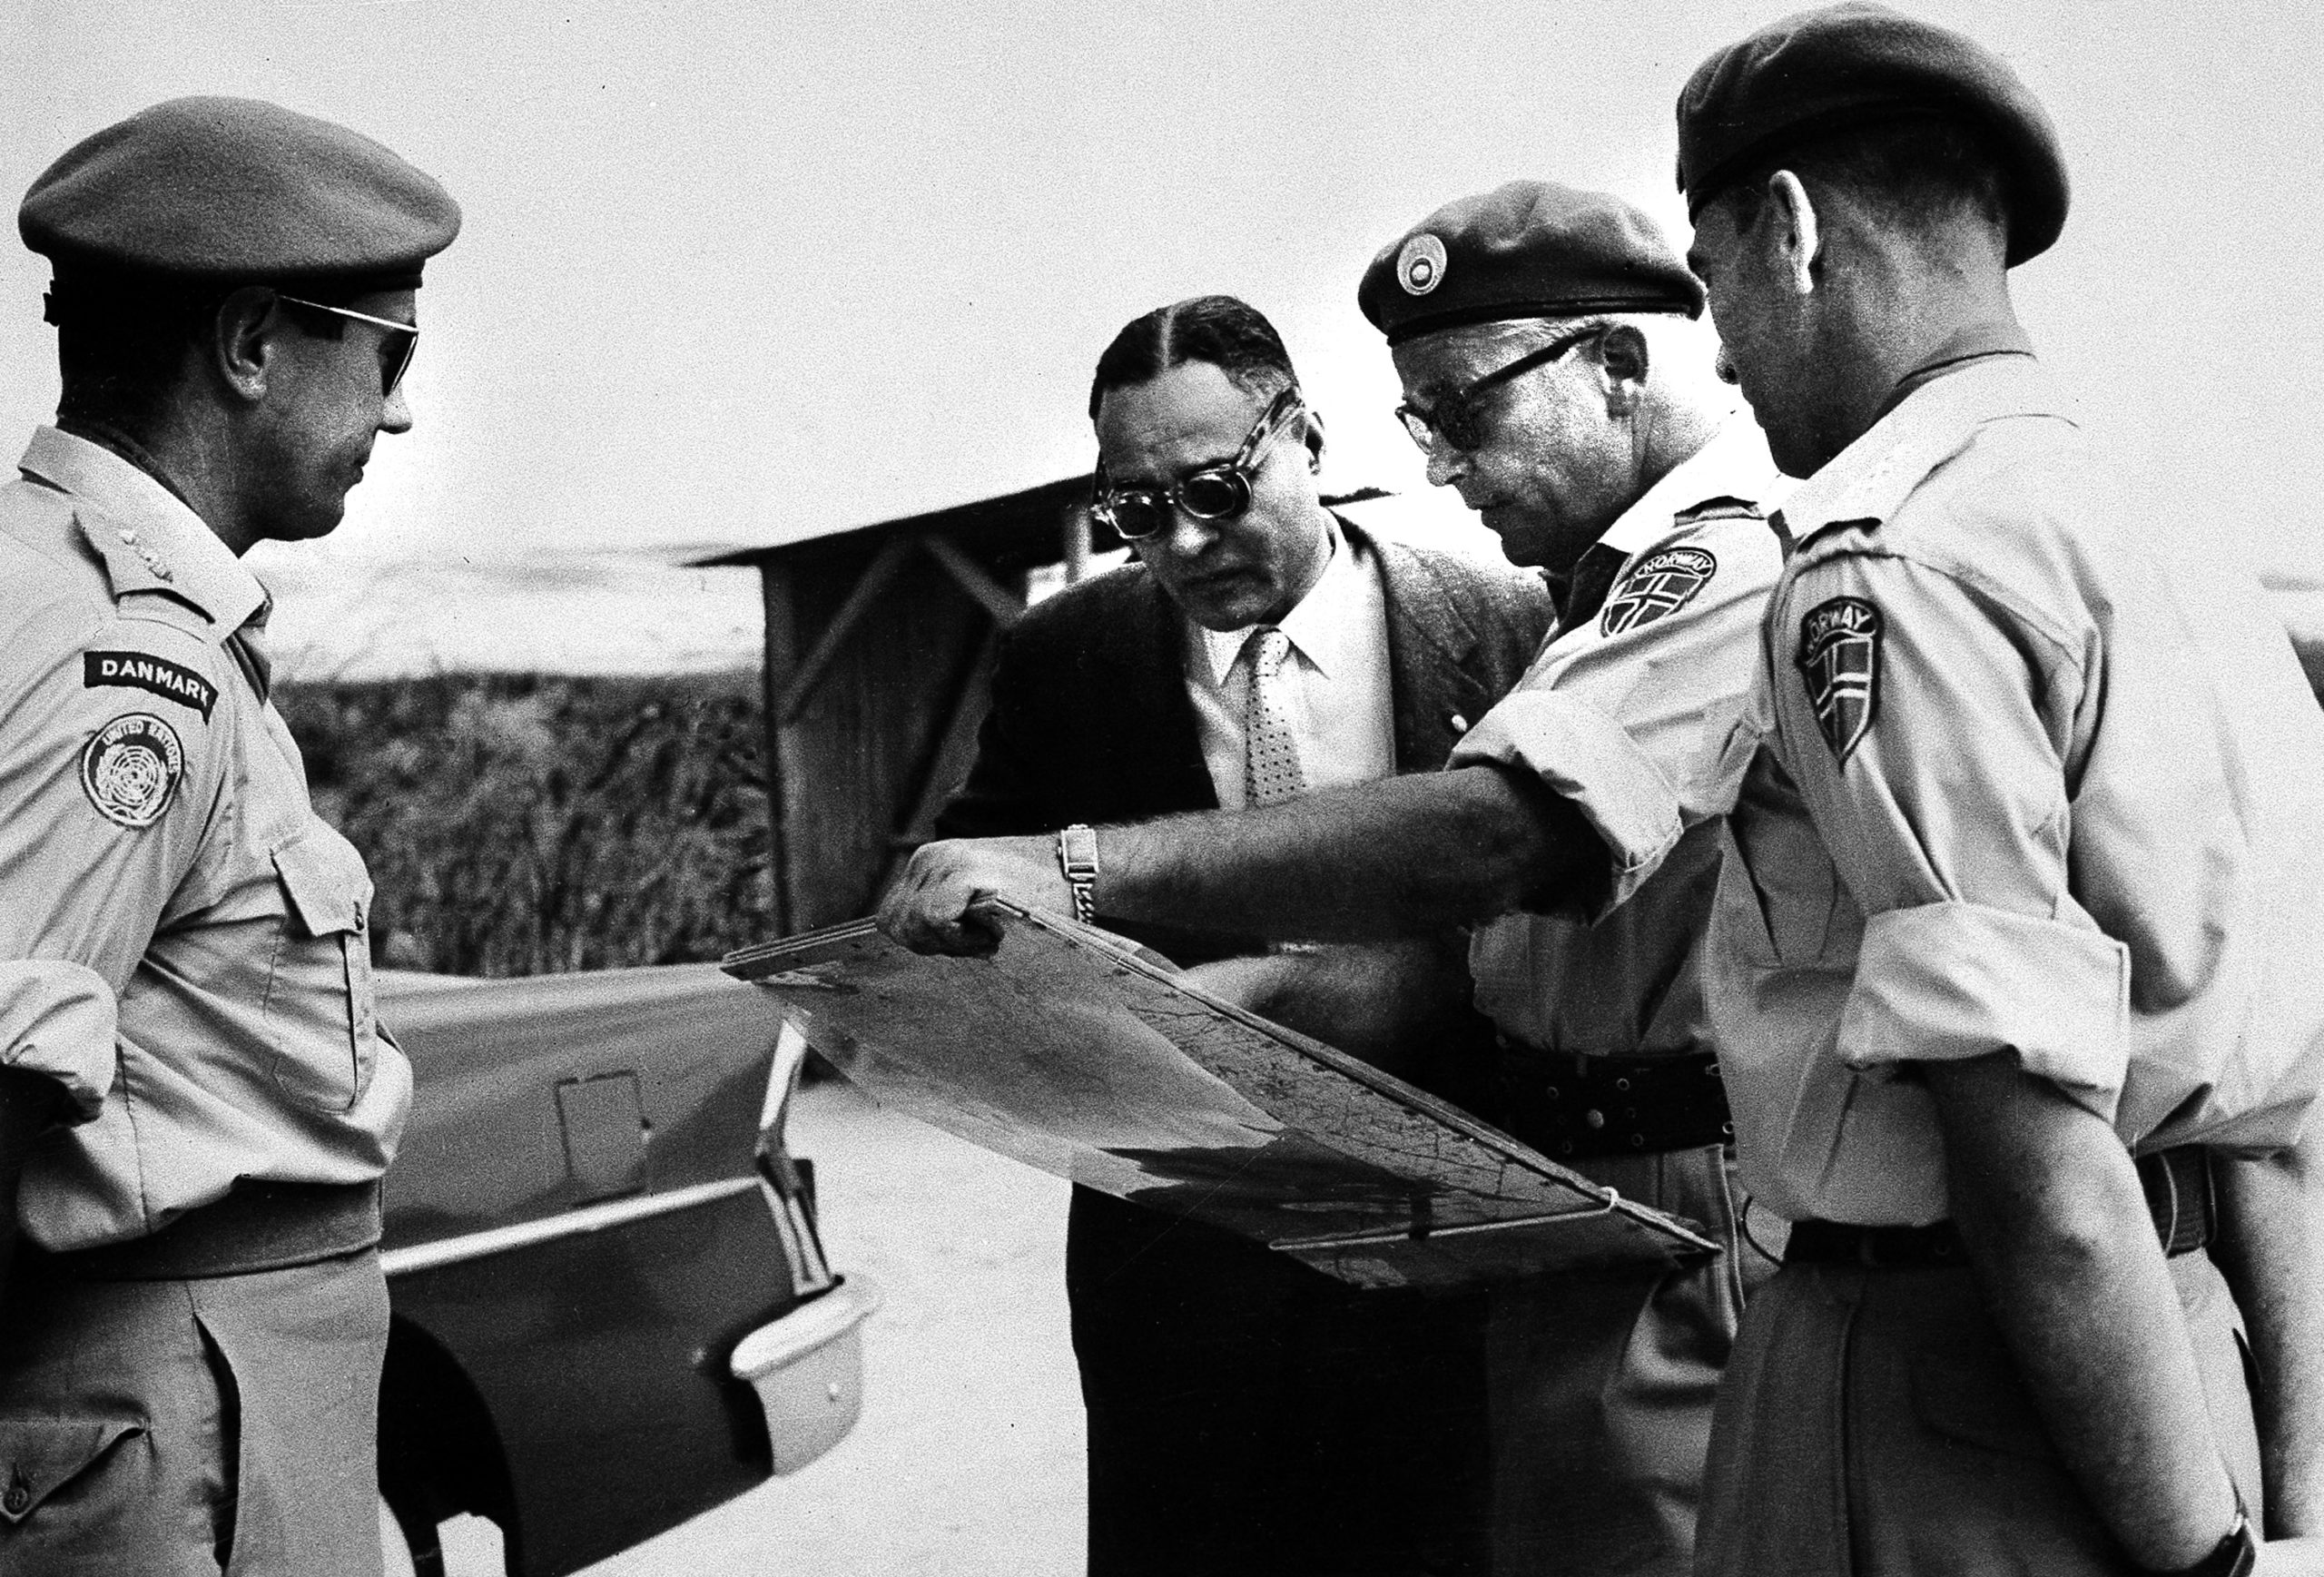 Ralph Bunche with Norwegian officers while visiting a UN Emergency Force observation post.